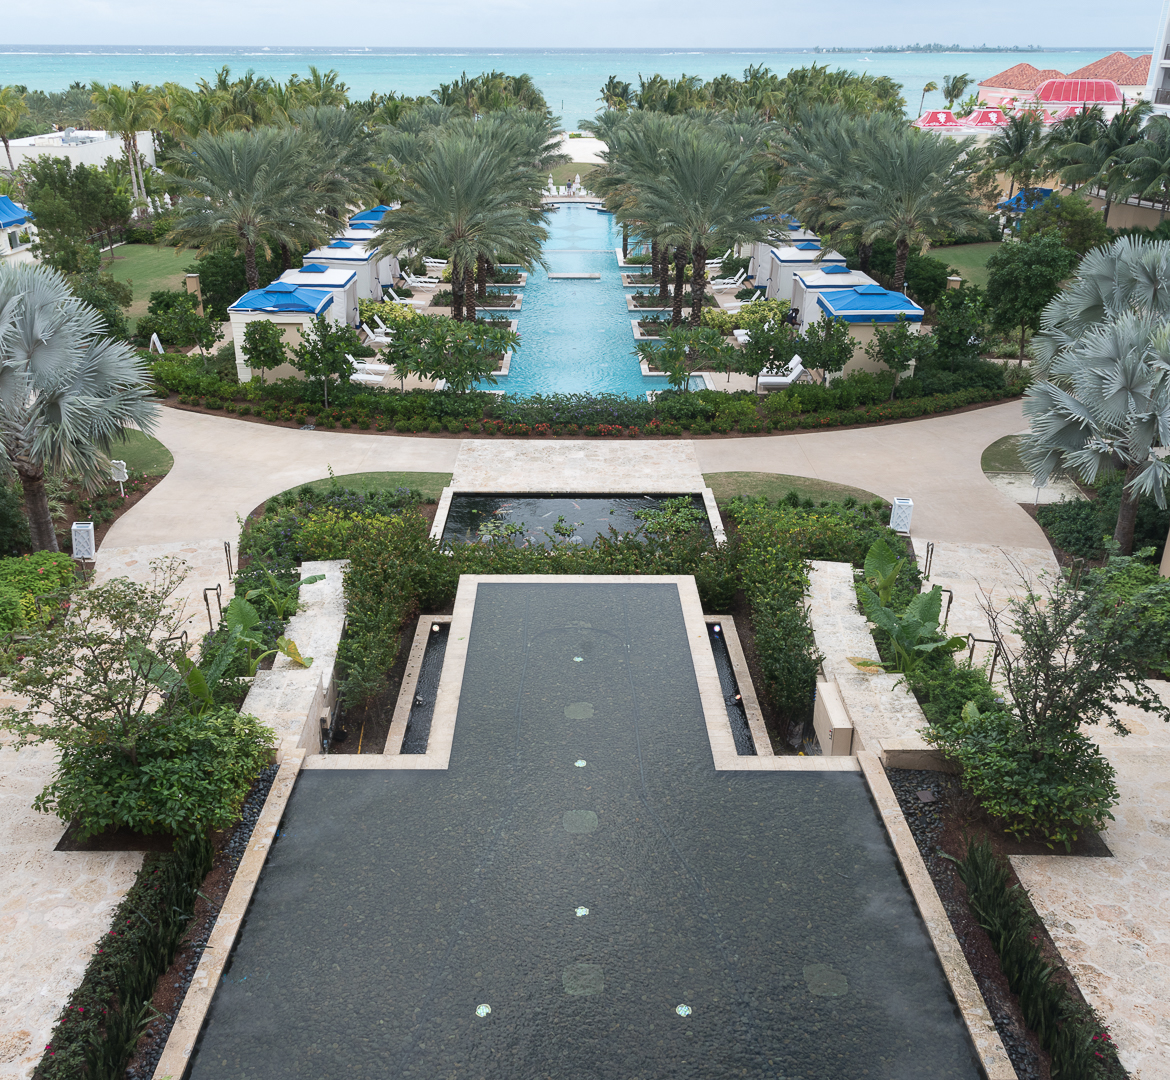 view from the fitness center at baha mar - baha mar resort review in the bahamas by popular Chicago travel blogger Visions of Vogue